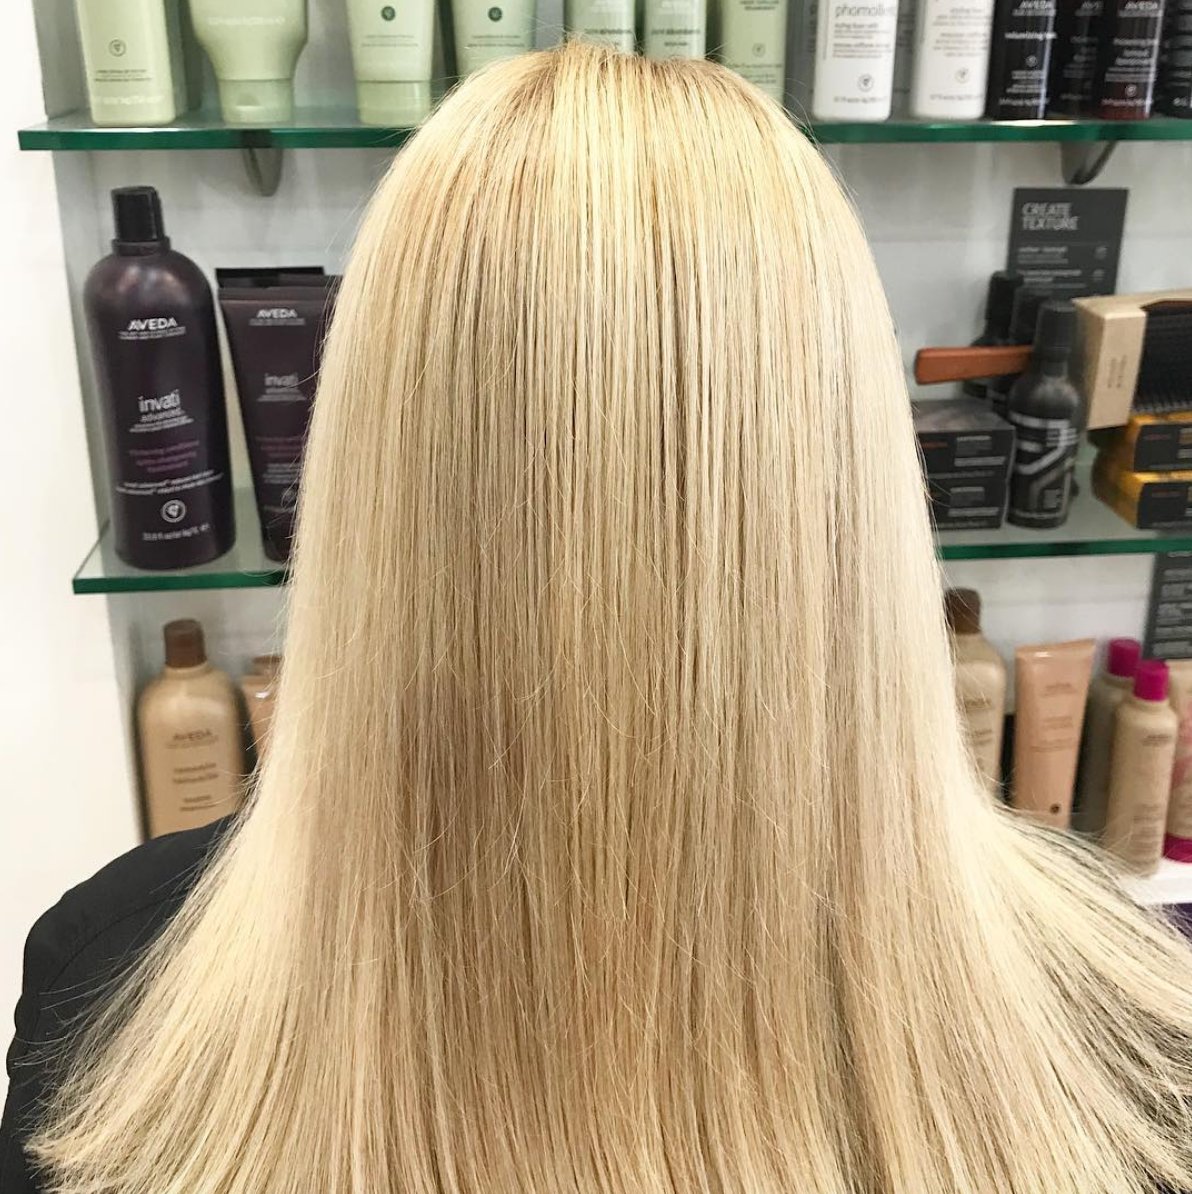 The dull weather earlier this week had a client of Kait's looking to brighten up her hair. Love how this turned out! #aveda #avedastylist #avedacolor #avedapermanent #avedablonde #blondehair #blonde #highlights #summerhair #dmvhair #dmvsalon #alexandriaVA #bazzak #bazzaksalon